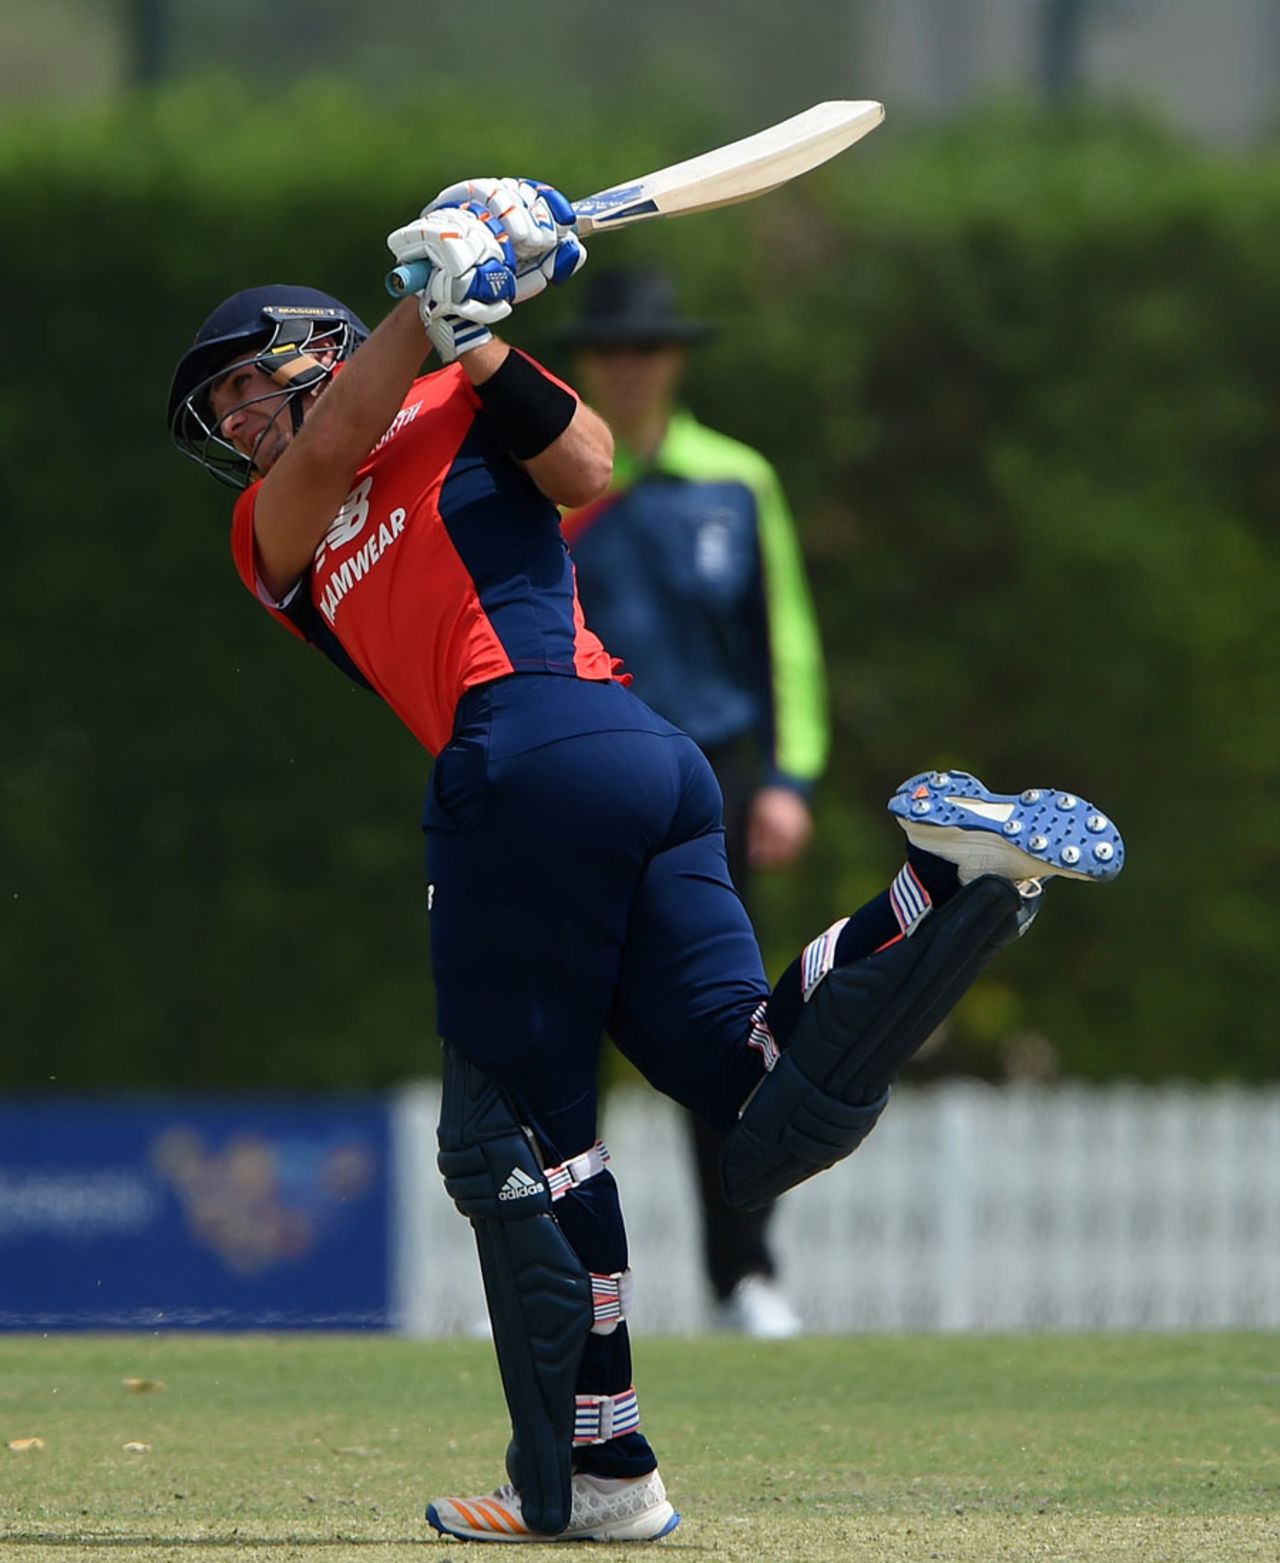 Liam Livingstone contorts himself to hit leg side, North v Worcestershire, ECB North v South series warm-up, Dubai, March 15, 2017